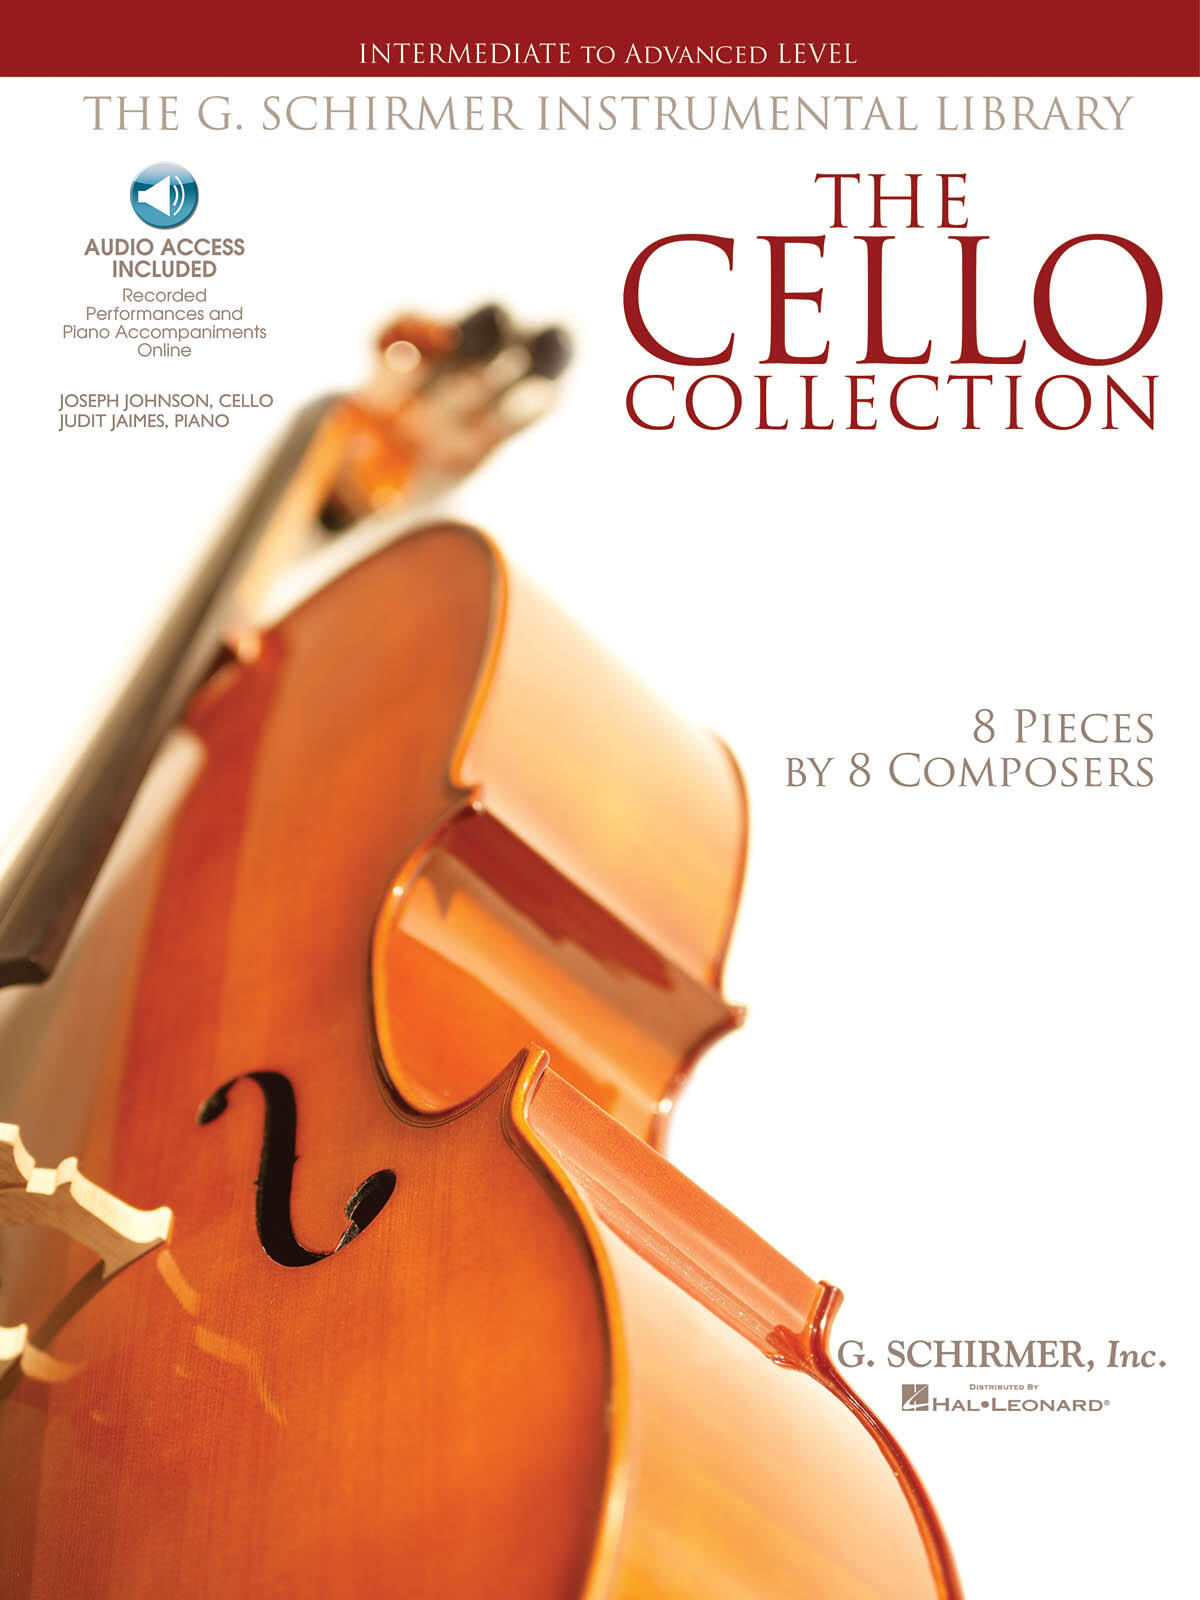 The Cello Collection Intermediate to Advanced Level / Instrumental Library : photo 1